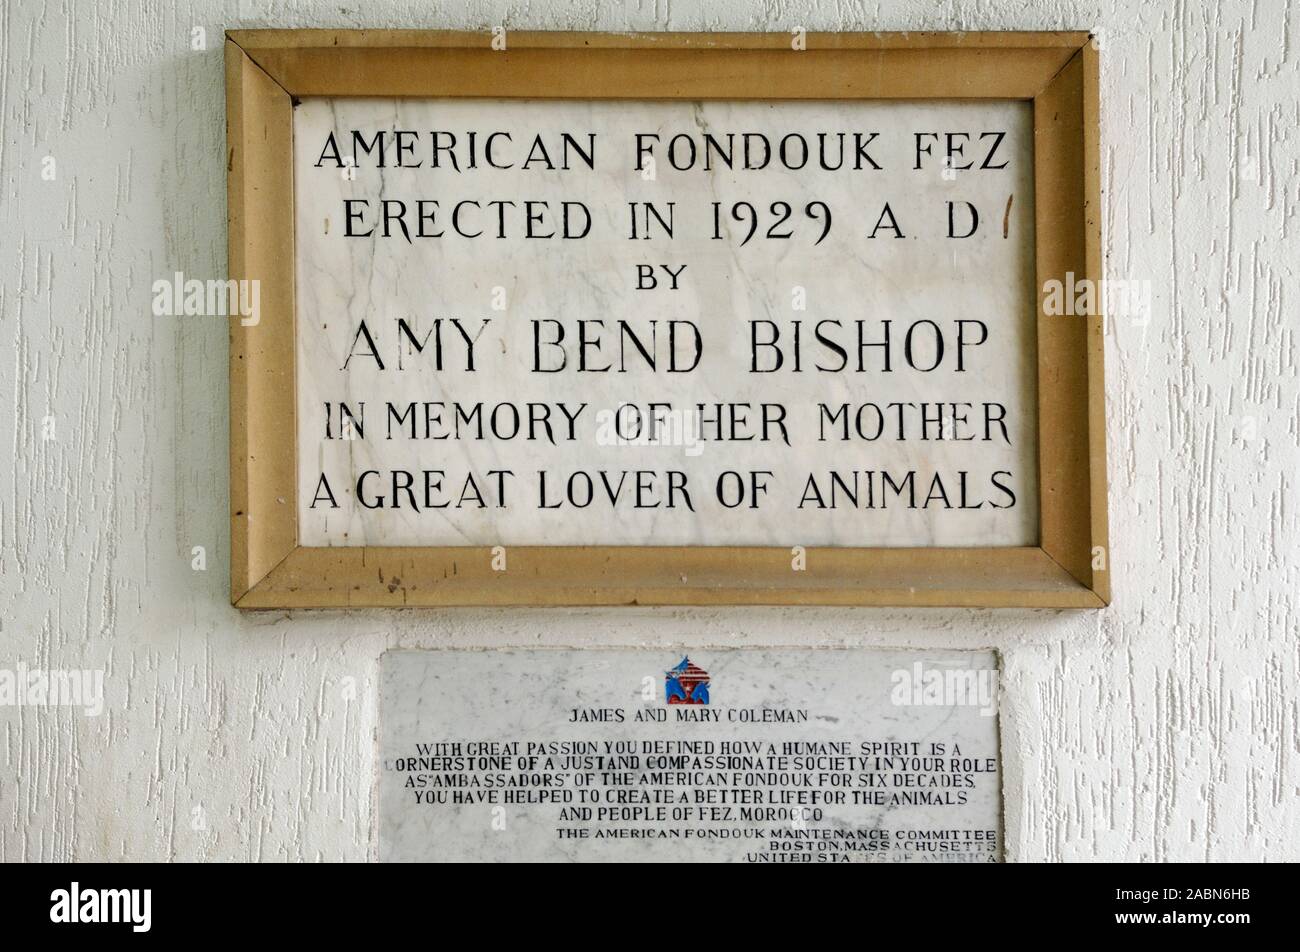 Sign at Entrance to American Fondouk Veterinary Clinic or Animal Hospital founded by Amy Bend Bishop in 1929 Fez or Fez Morocco Stock Photo